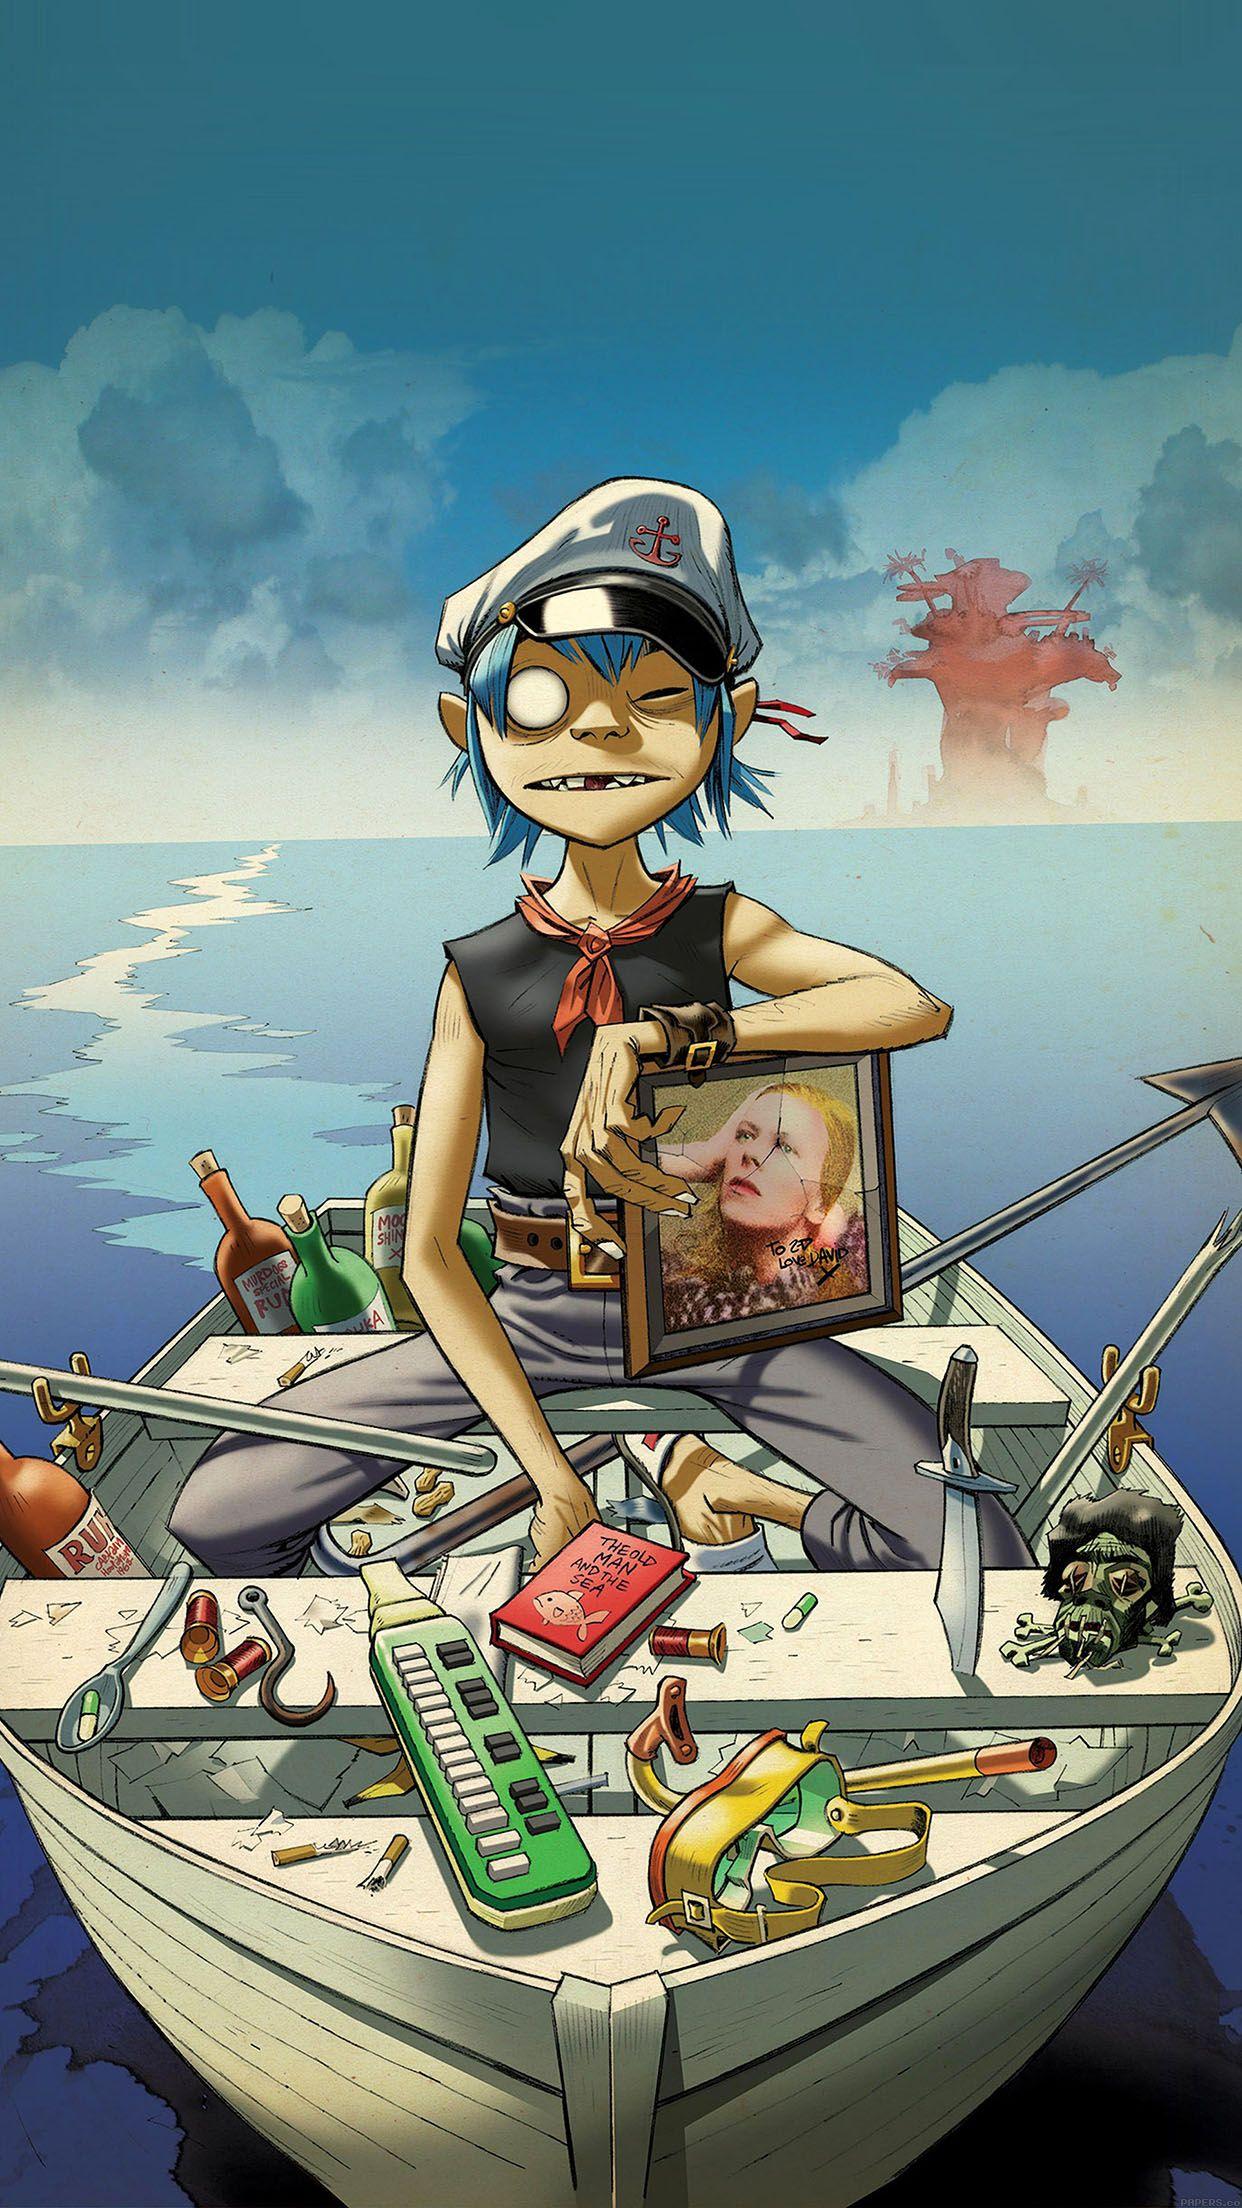 Wallpapers Gorillaz Boat Illust Music Android wallpapers